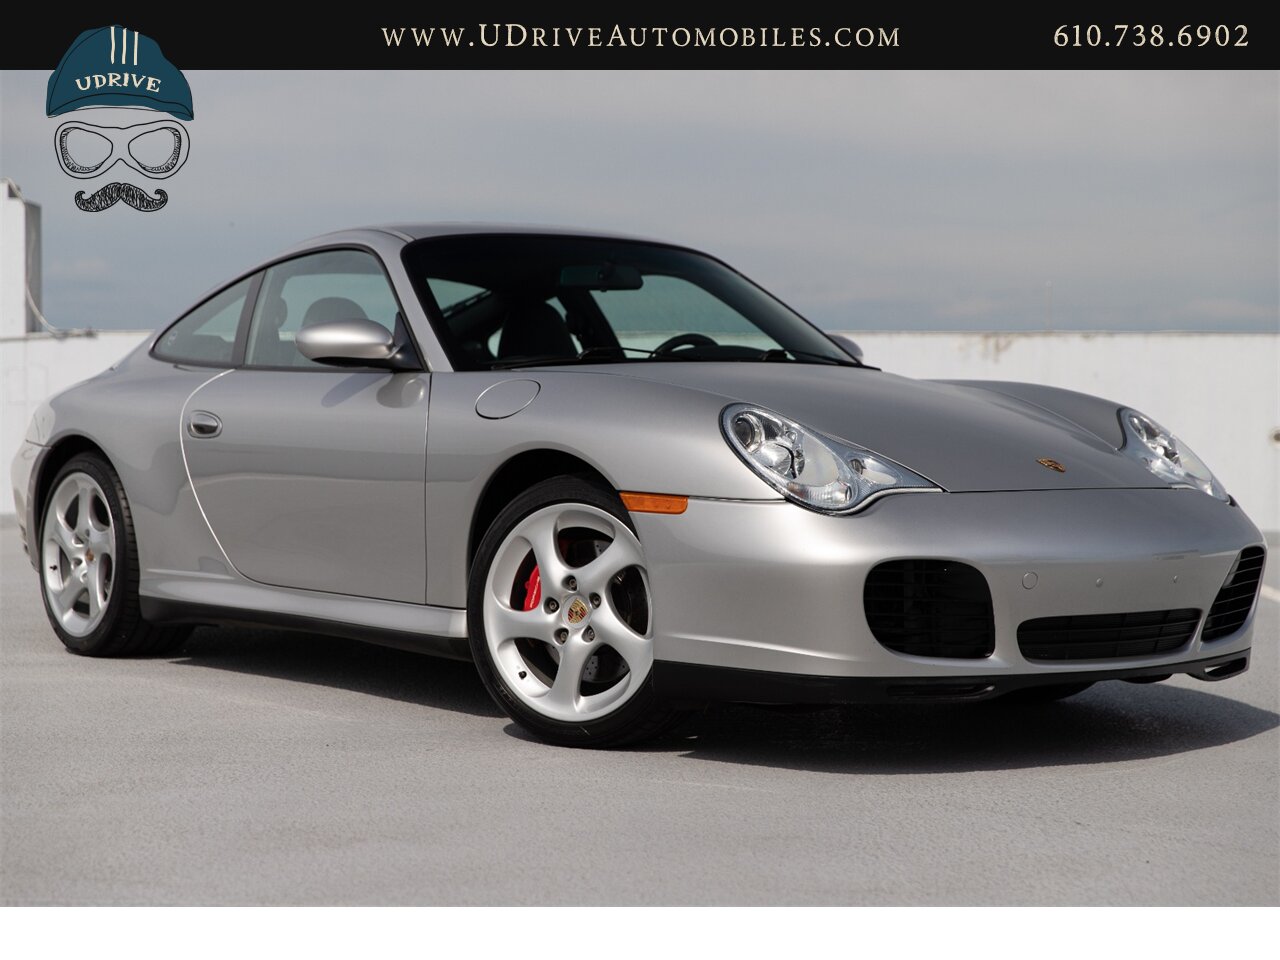 2003 Porsche 911 Carrera 4S C4S 6 Speed Manual Sport Seats  Leather Covered Hardback Seats - Photo 5 - West Chester, PA 19382